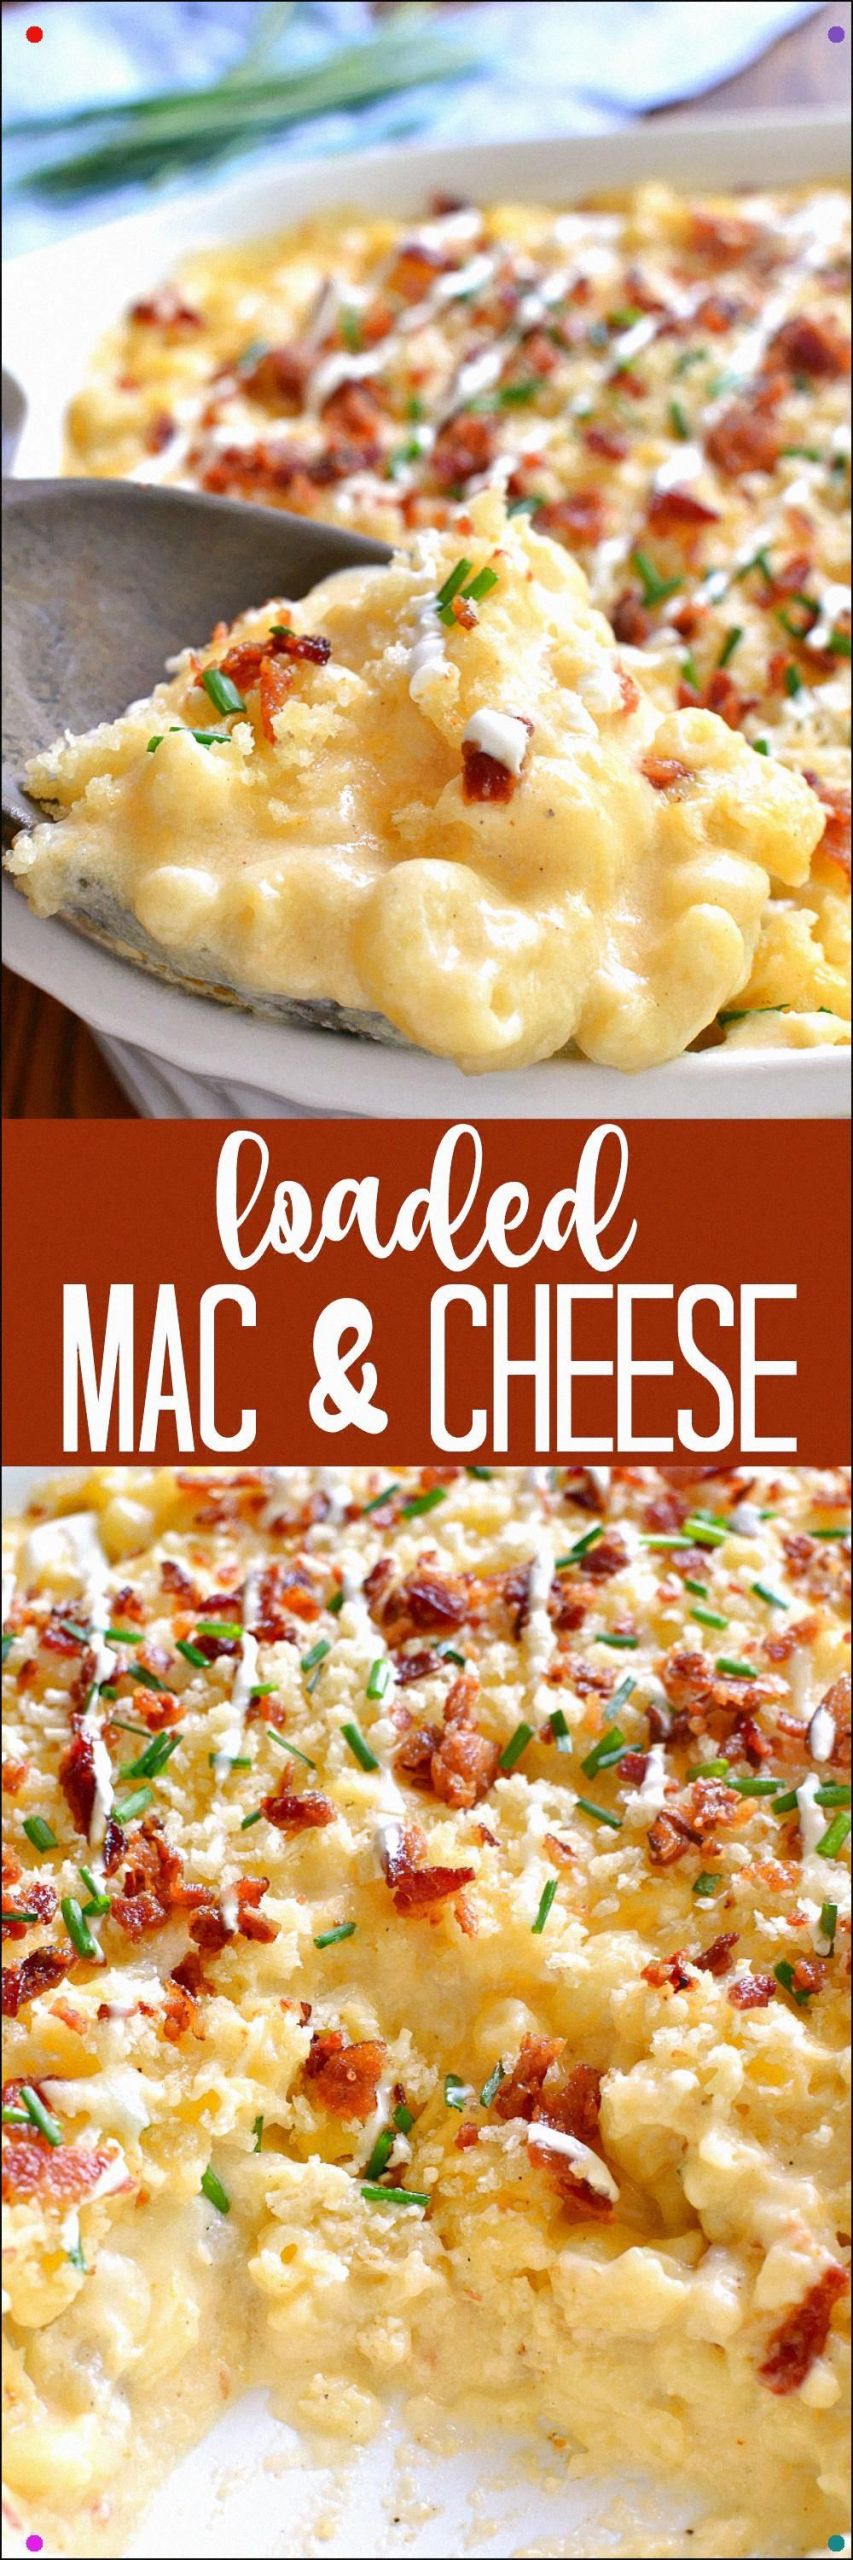 Baked Macaroni And Cheese Recipes With Sour Cream
 Deliciously Creamy Baked Mac and Cheese Loaded With Sour